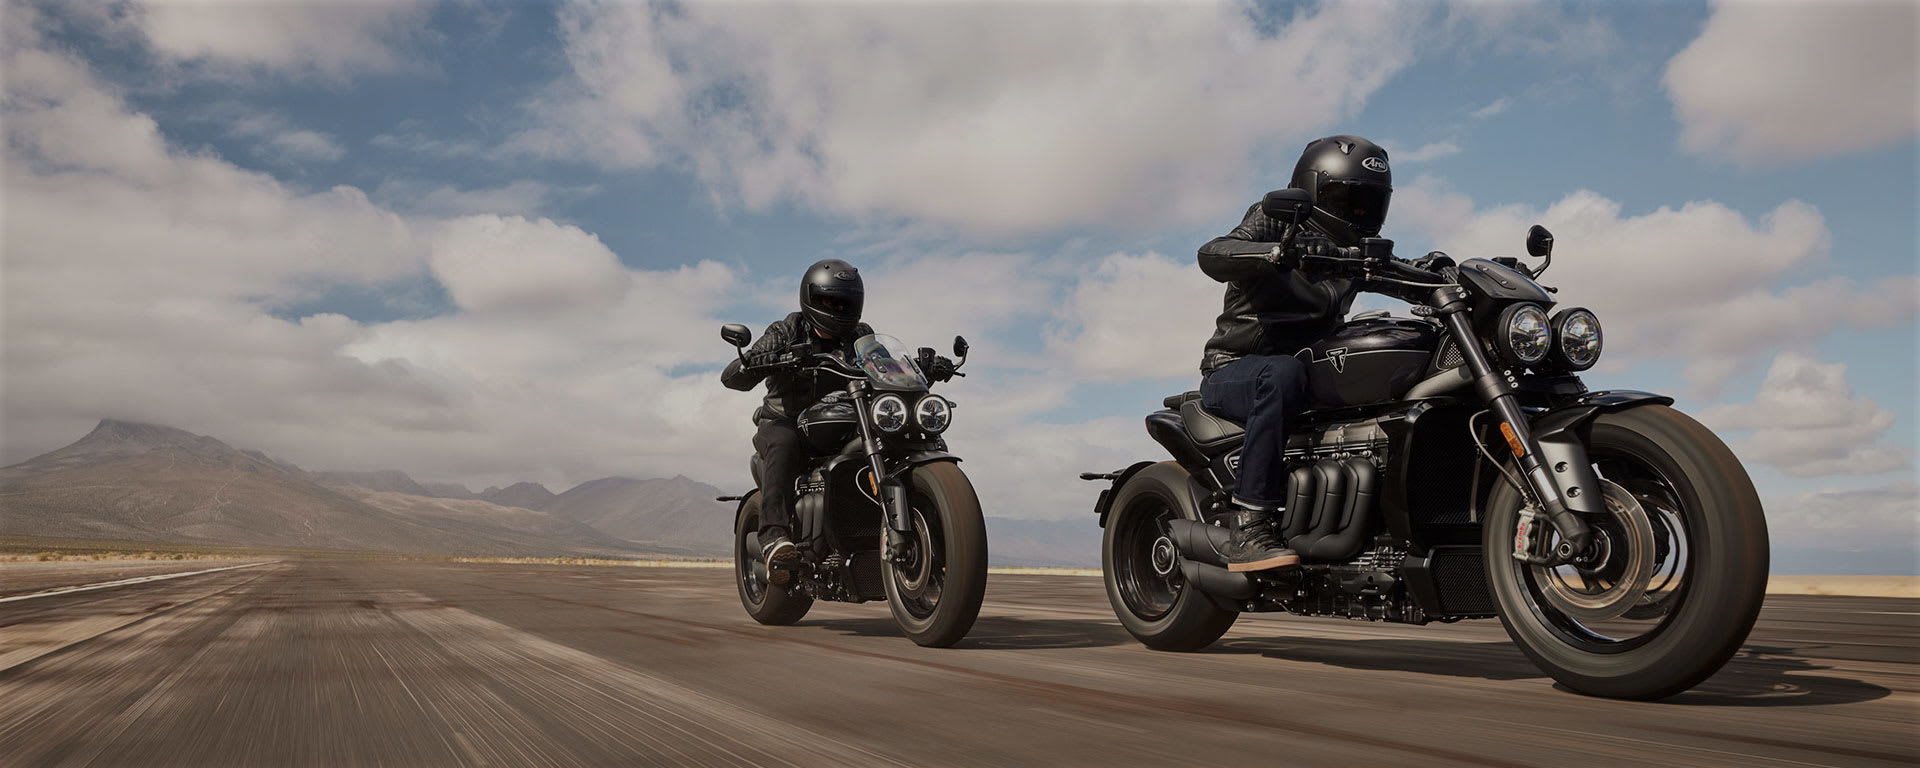 Triumph Rocket 3 Storm two riders on the road)